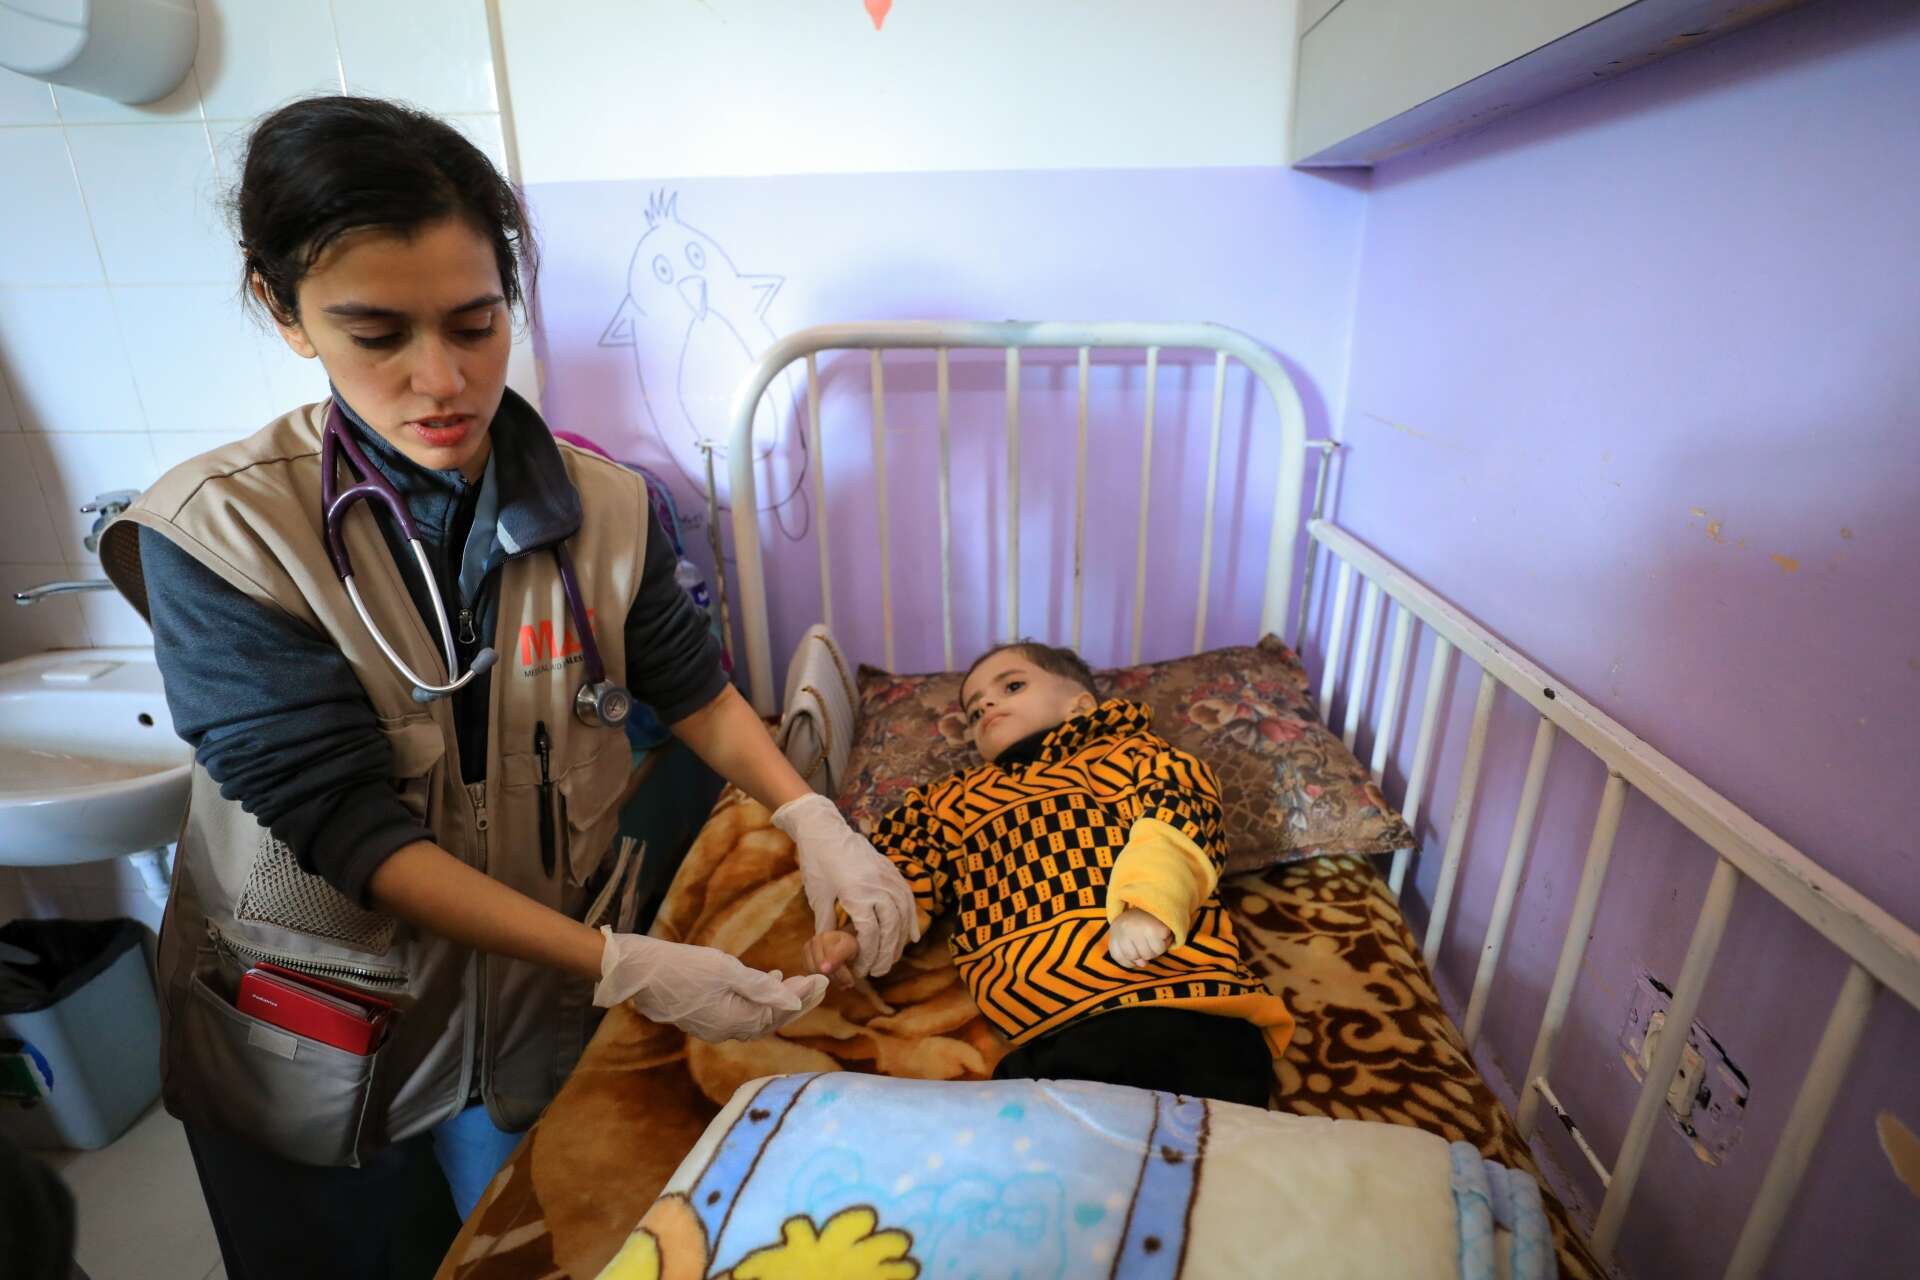 Dr. Jilani tends to a young child at Al Asqa hospital in Gaza.